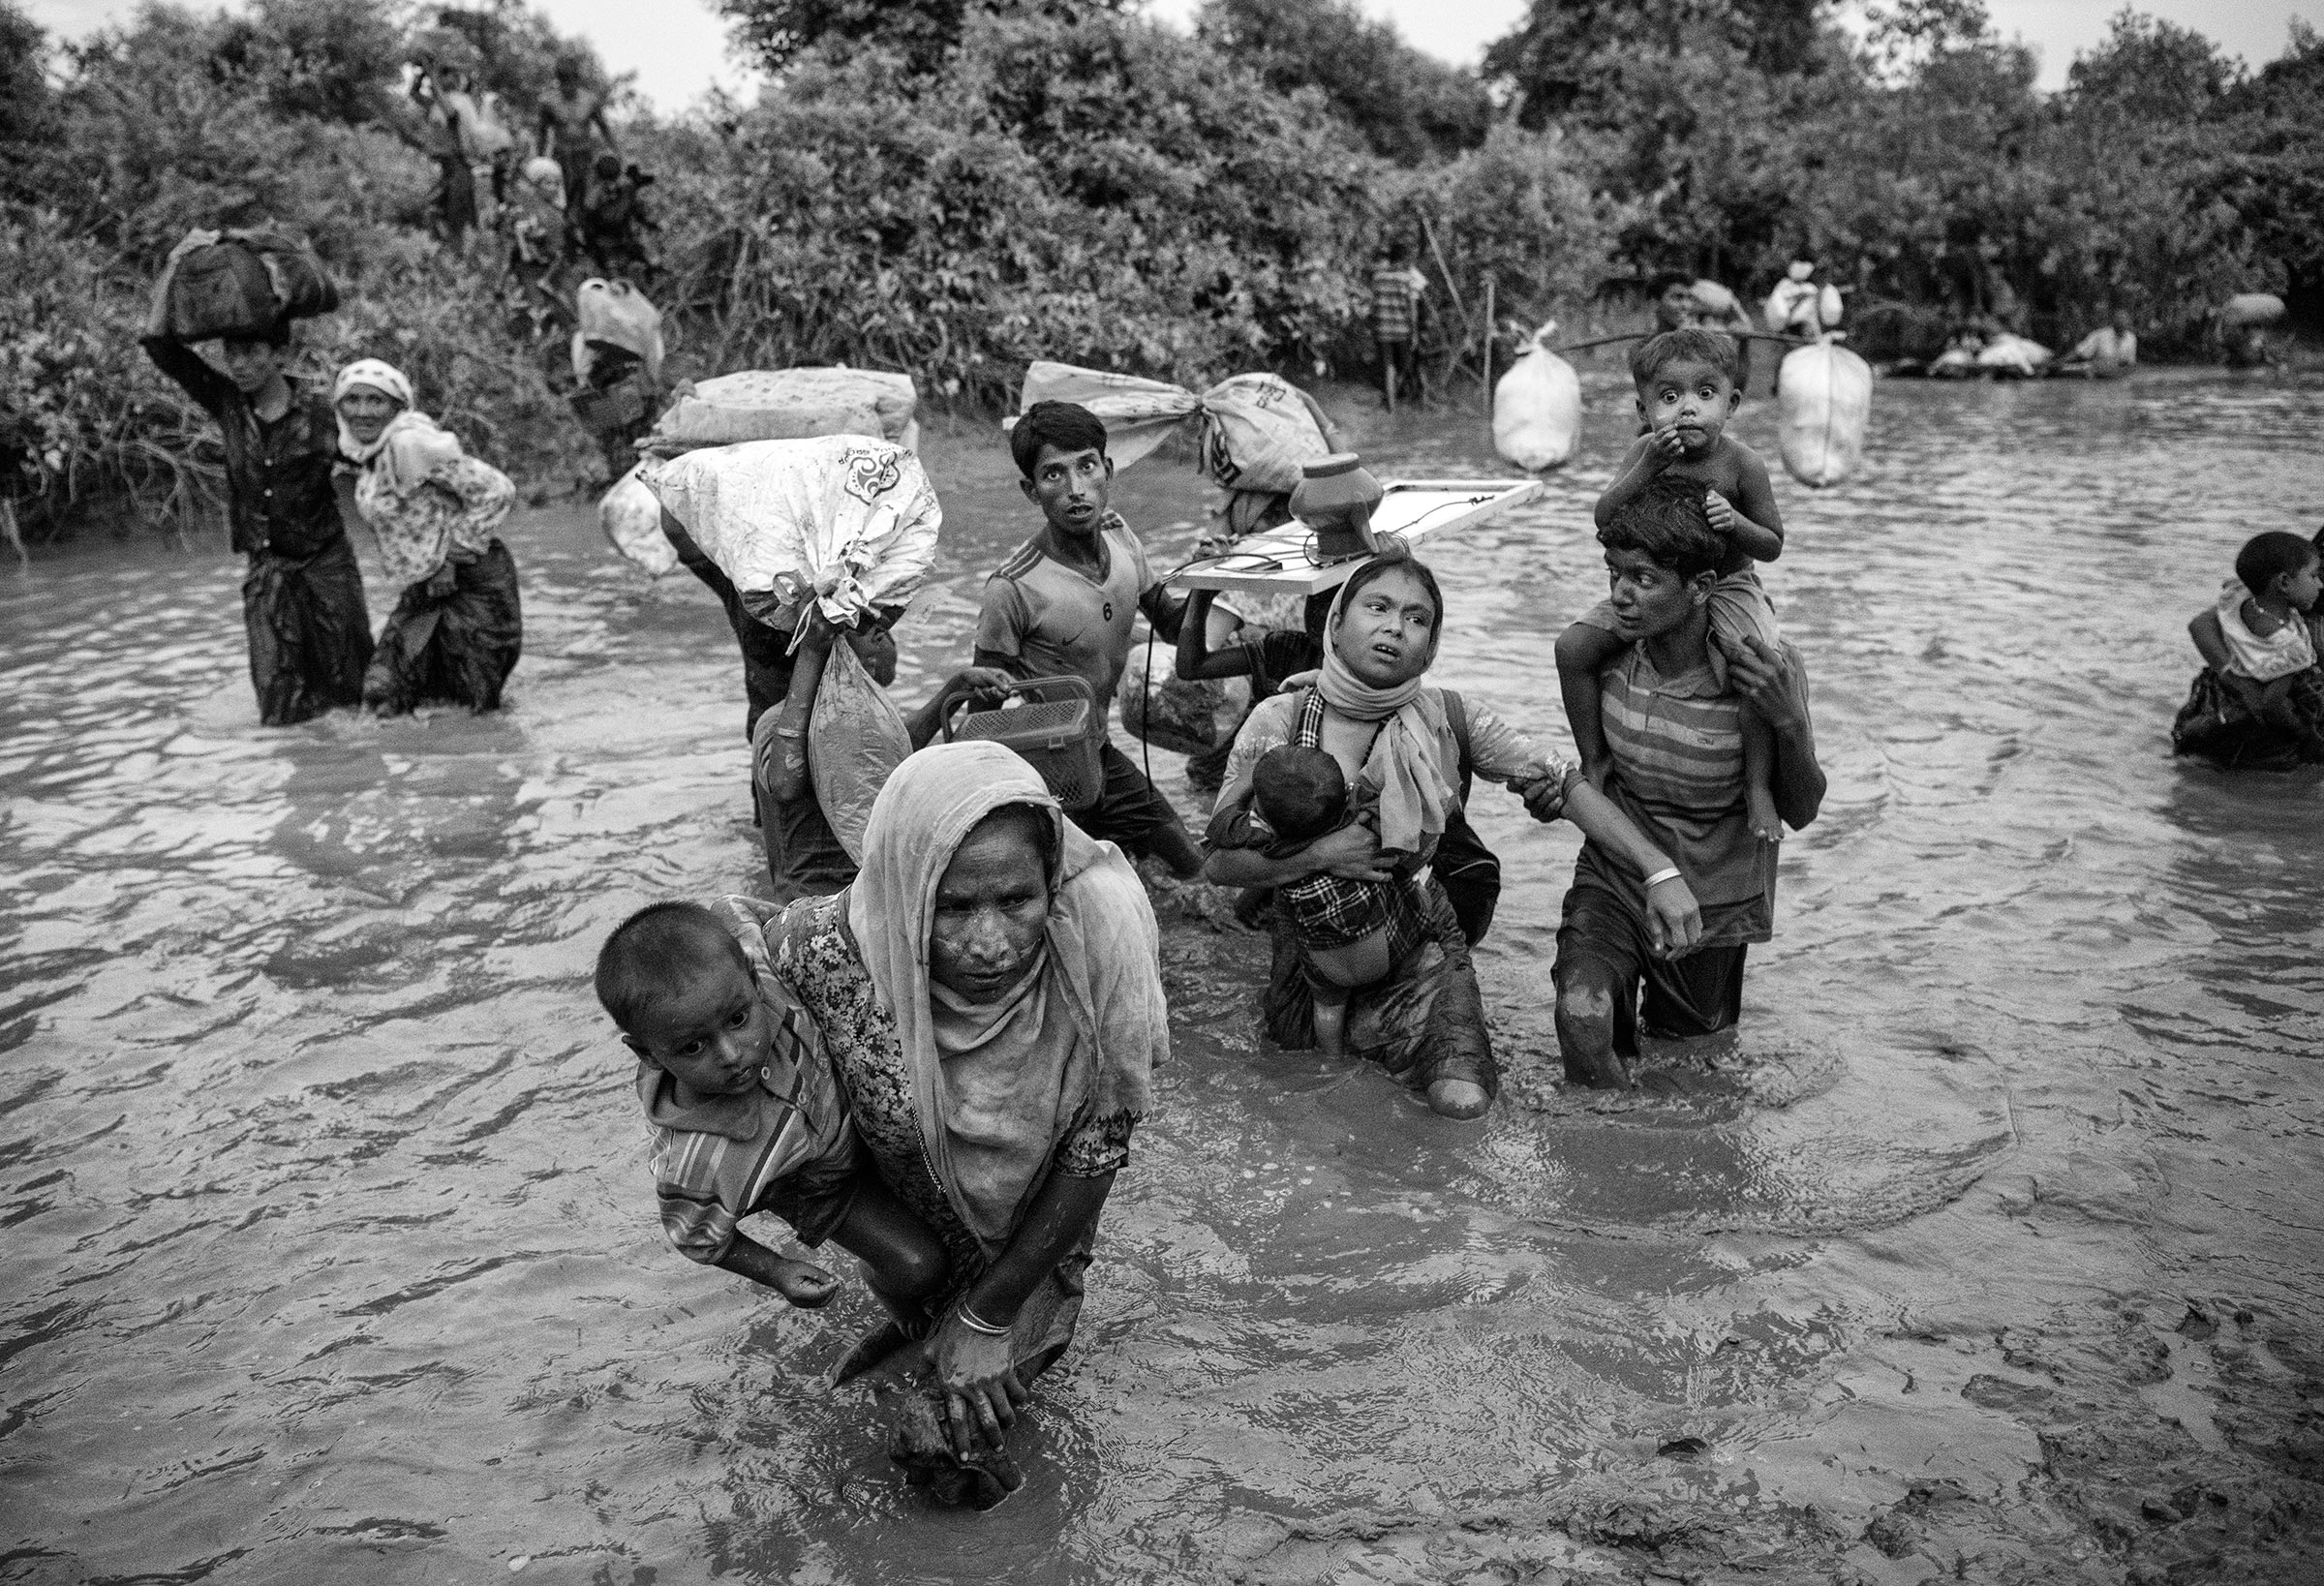 Rohingya Muslim refugees cross a canal as they flee over the border from Myanmar into Bangladesh at the Naf River on Nov. 1, 2017 near Anjuman Para in Cox's Bazar, Bangladesh.